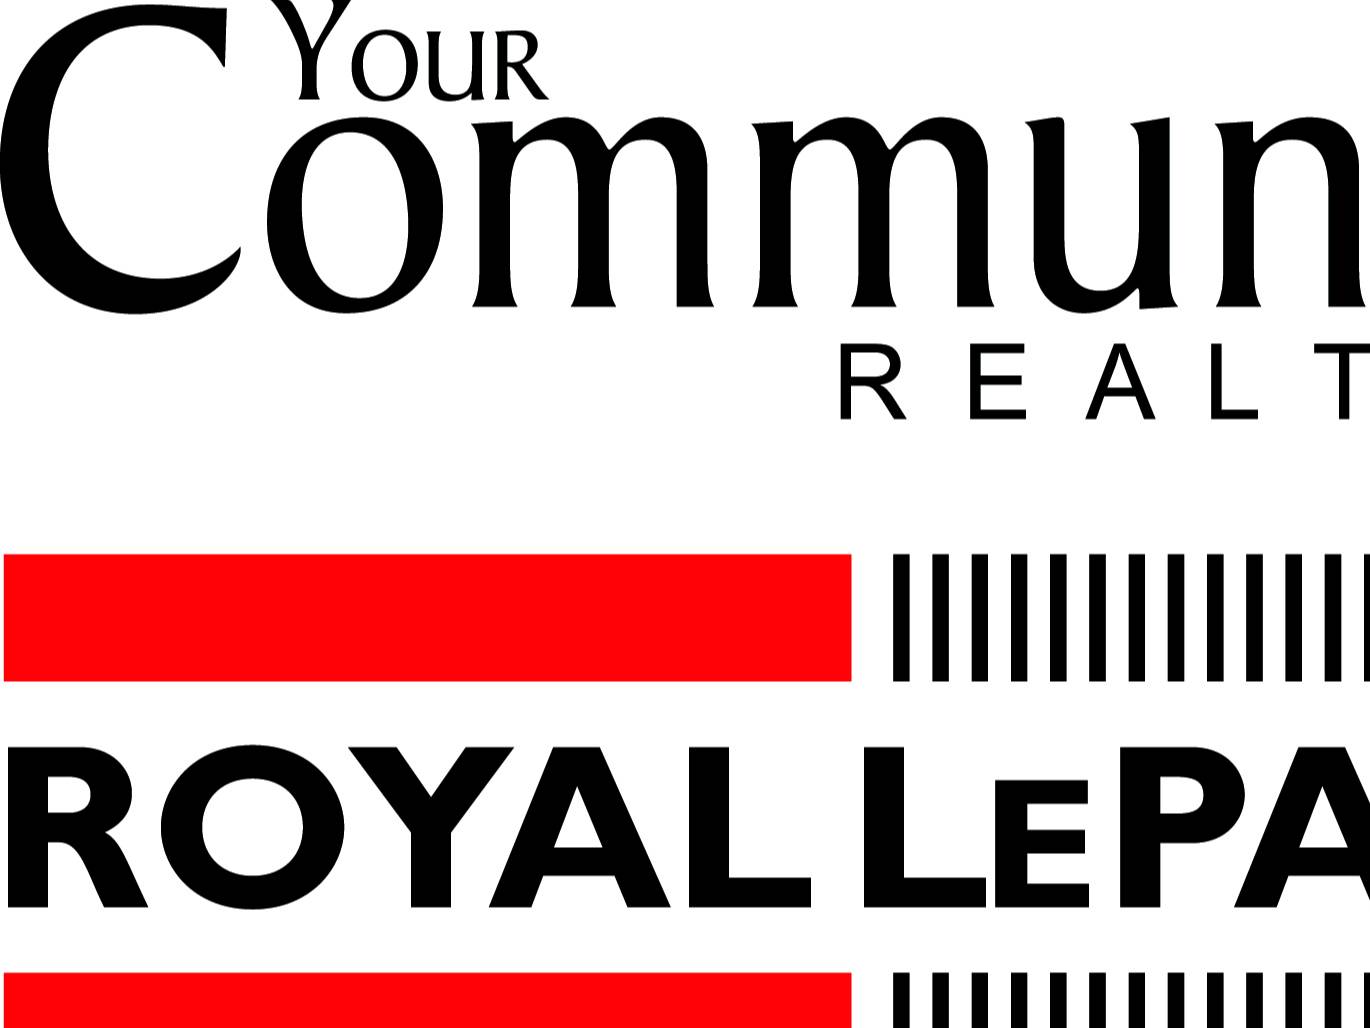 Royal LePage Your Community Realty - 9411 JANE STREET, Vaughan, ON, L6A 4J3